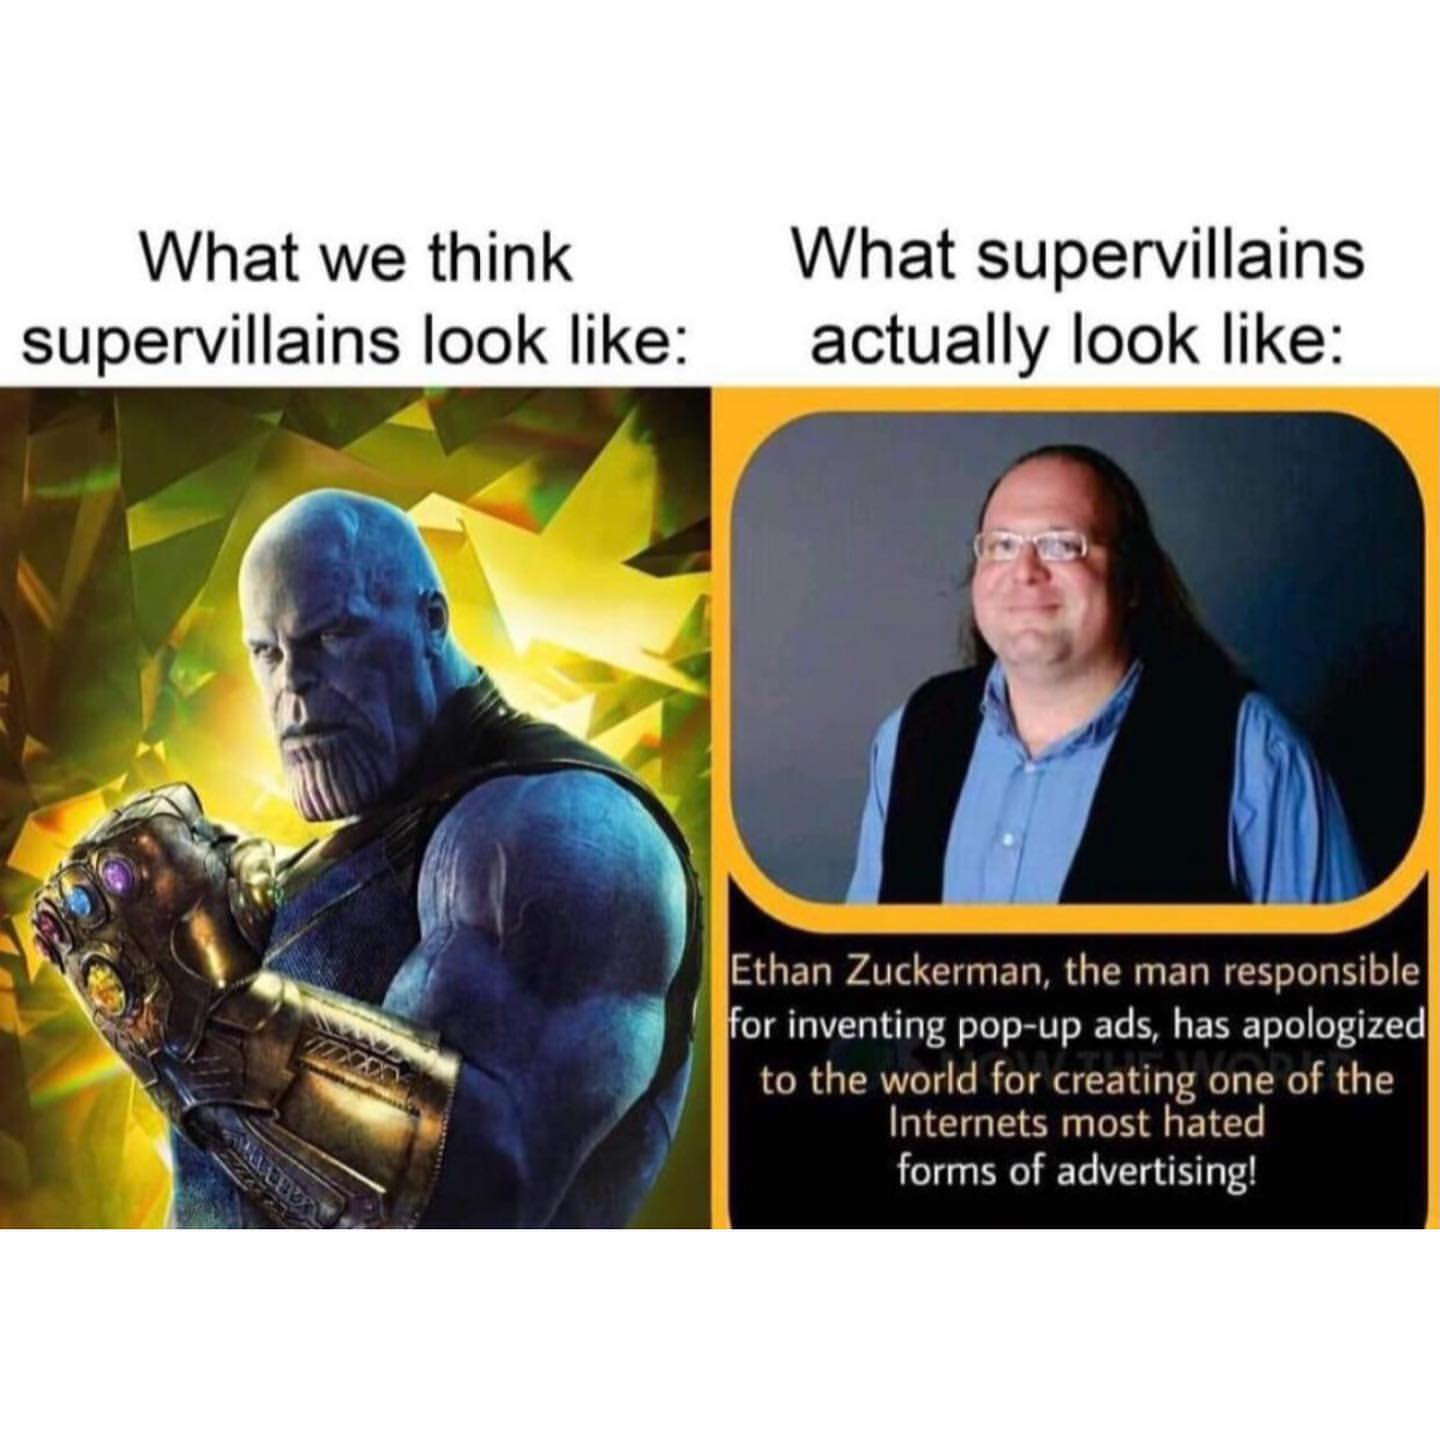 What we think supervillains look like:  What supervillains actually look like: Ethan Zuckerman, the man responsible or inventing pop-up ads, has apologized to the world for creating one of the Internets most hated forms of advertising!